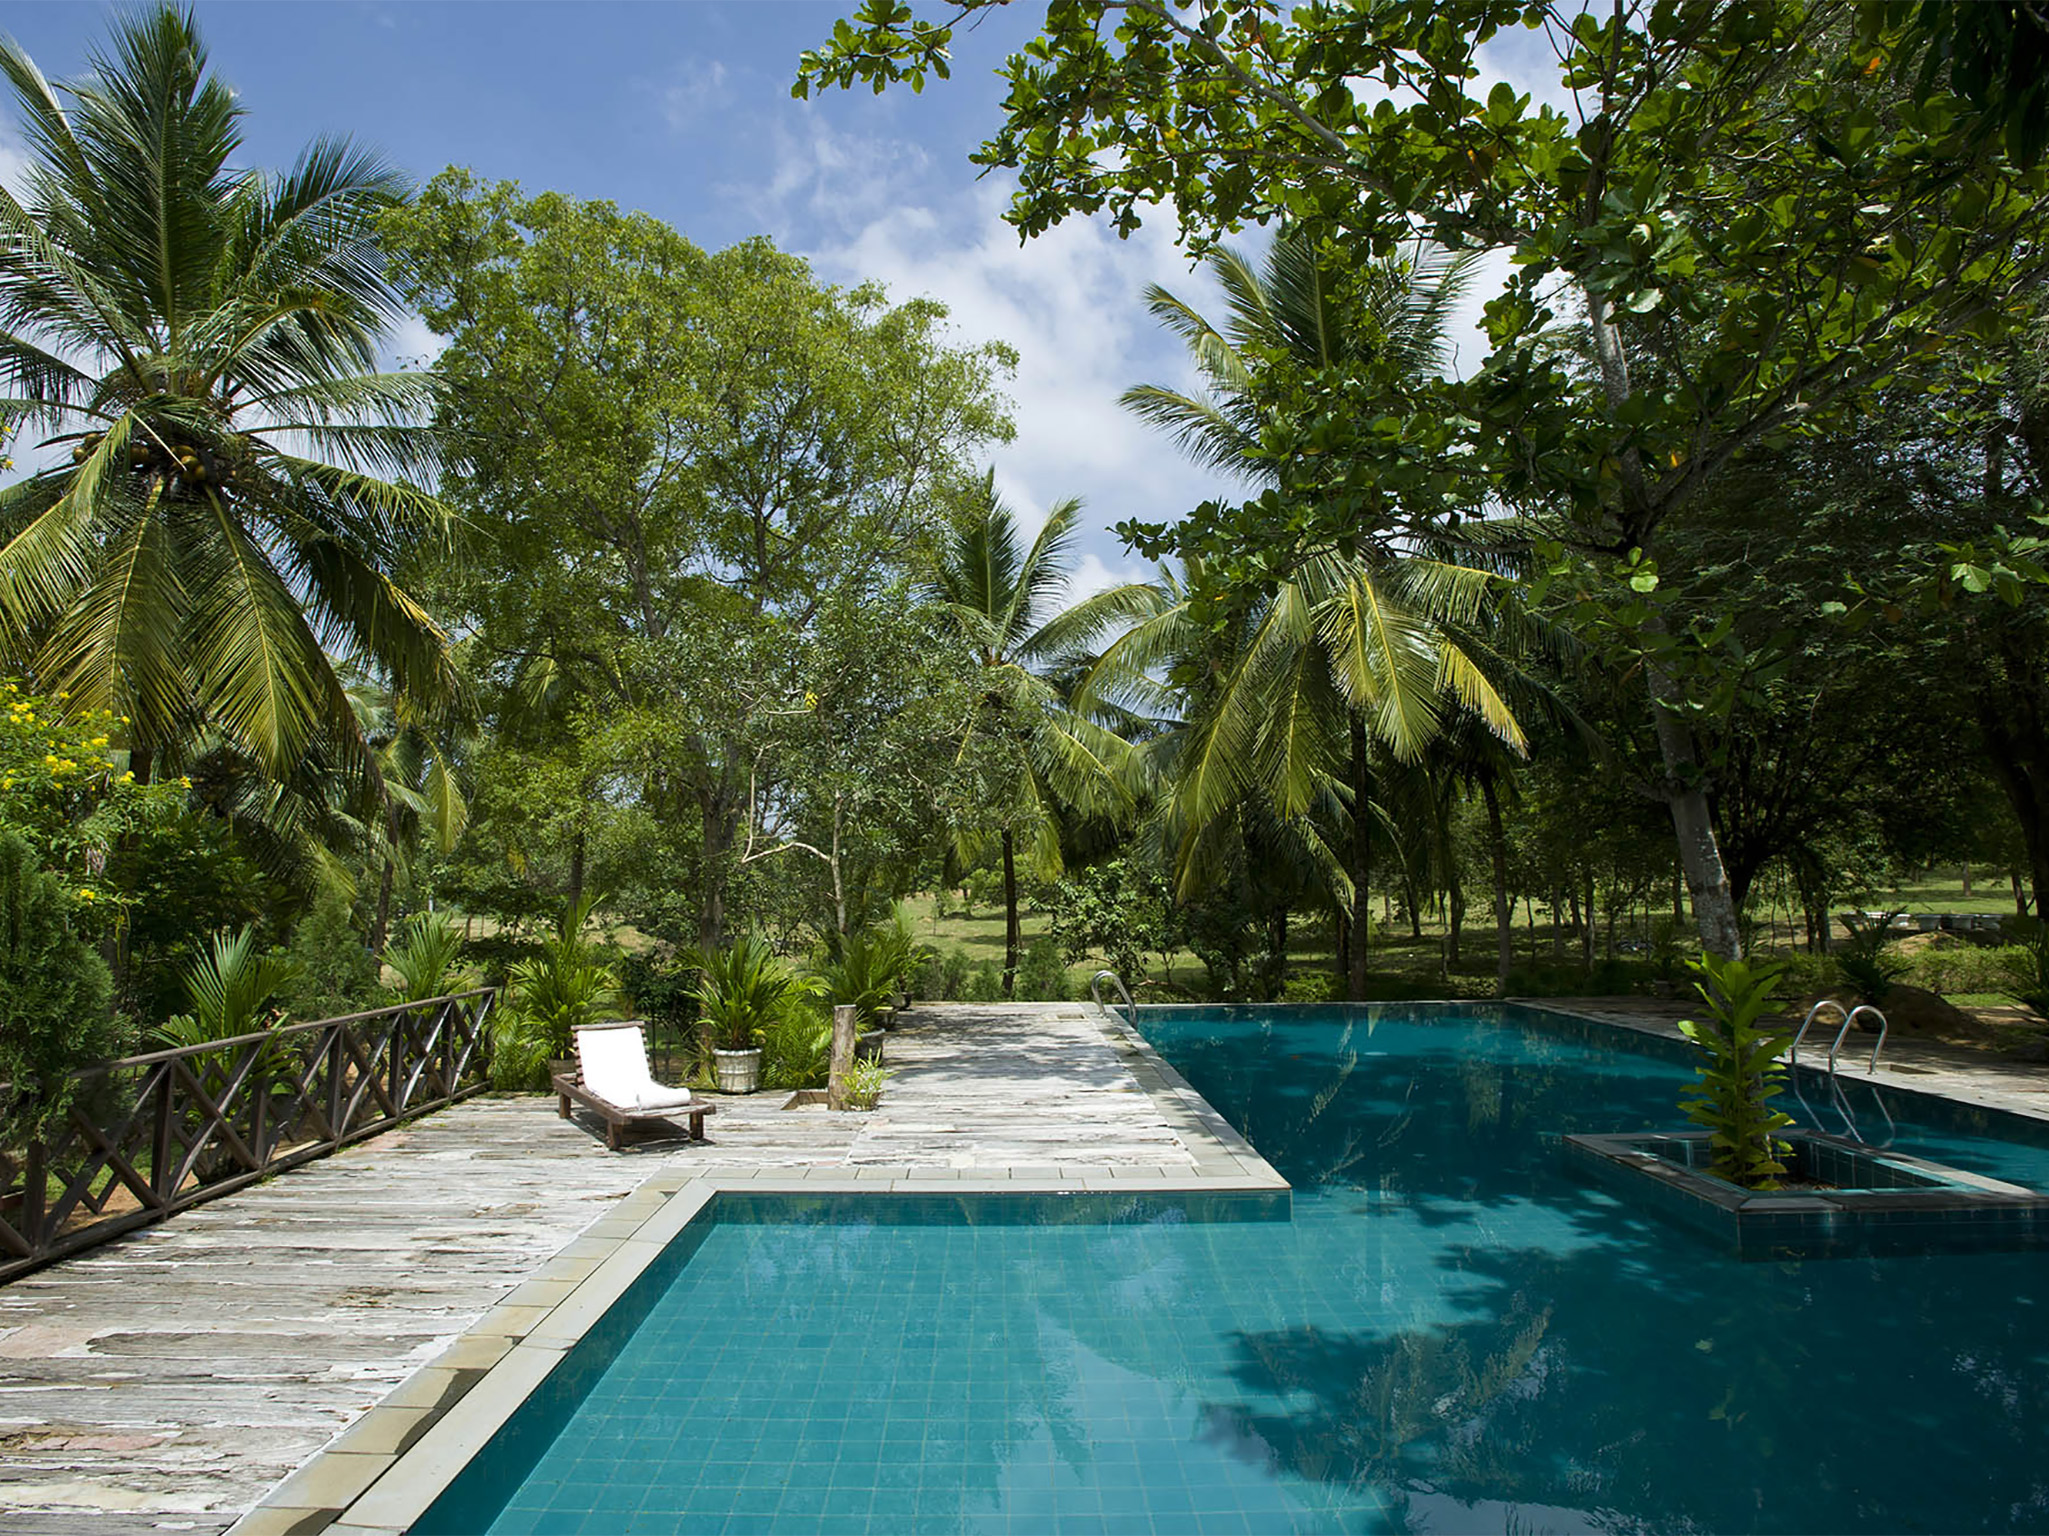 Oceans Edge - Pool and garden view - Ocean’s Edge, Tangalle, South Coast